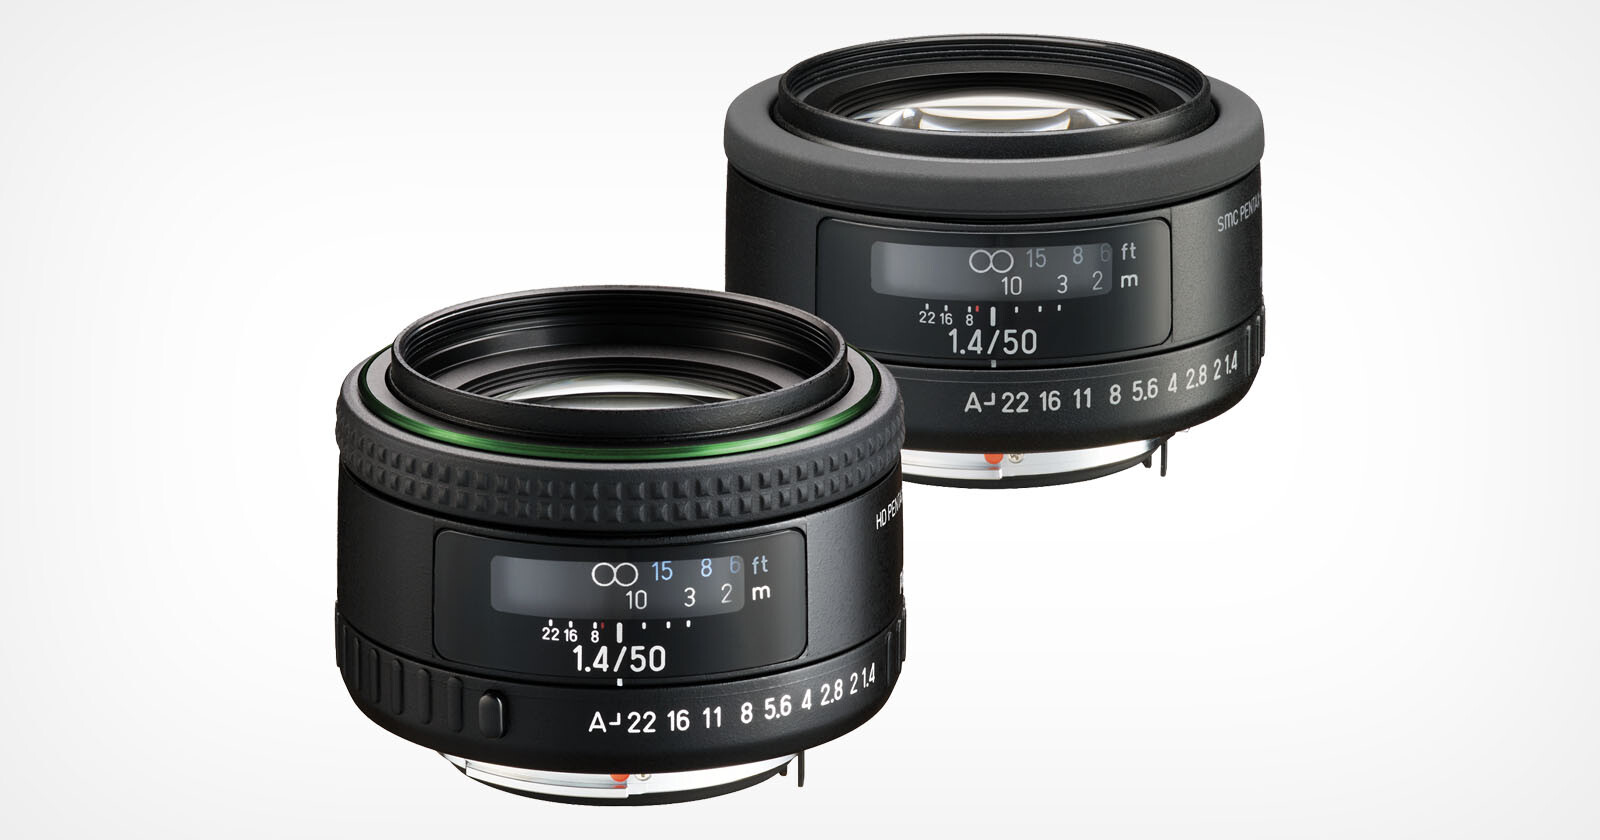 Pentaxs Two New 50mm Lenses Look Similar But Take Different Photos